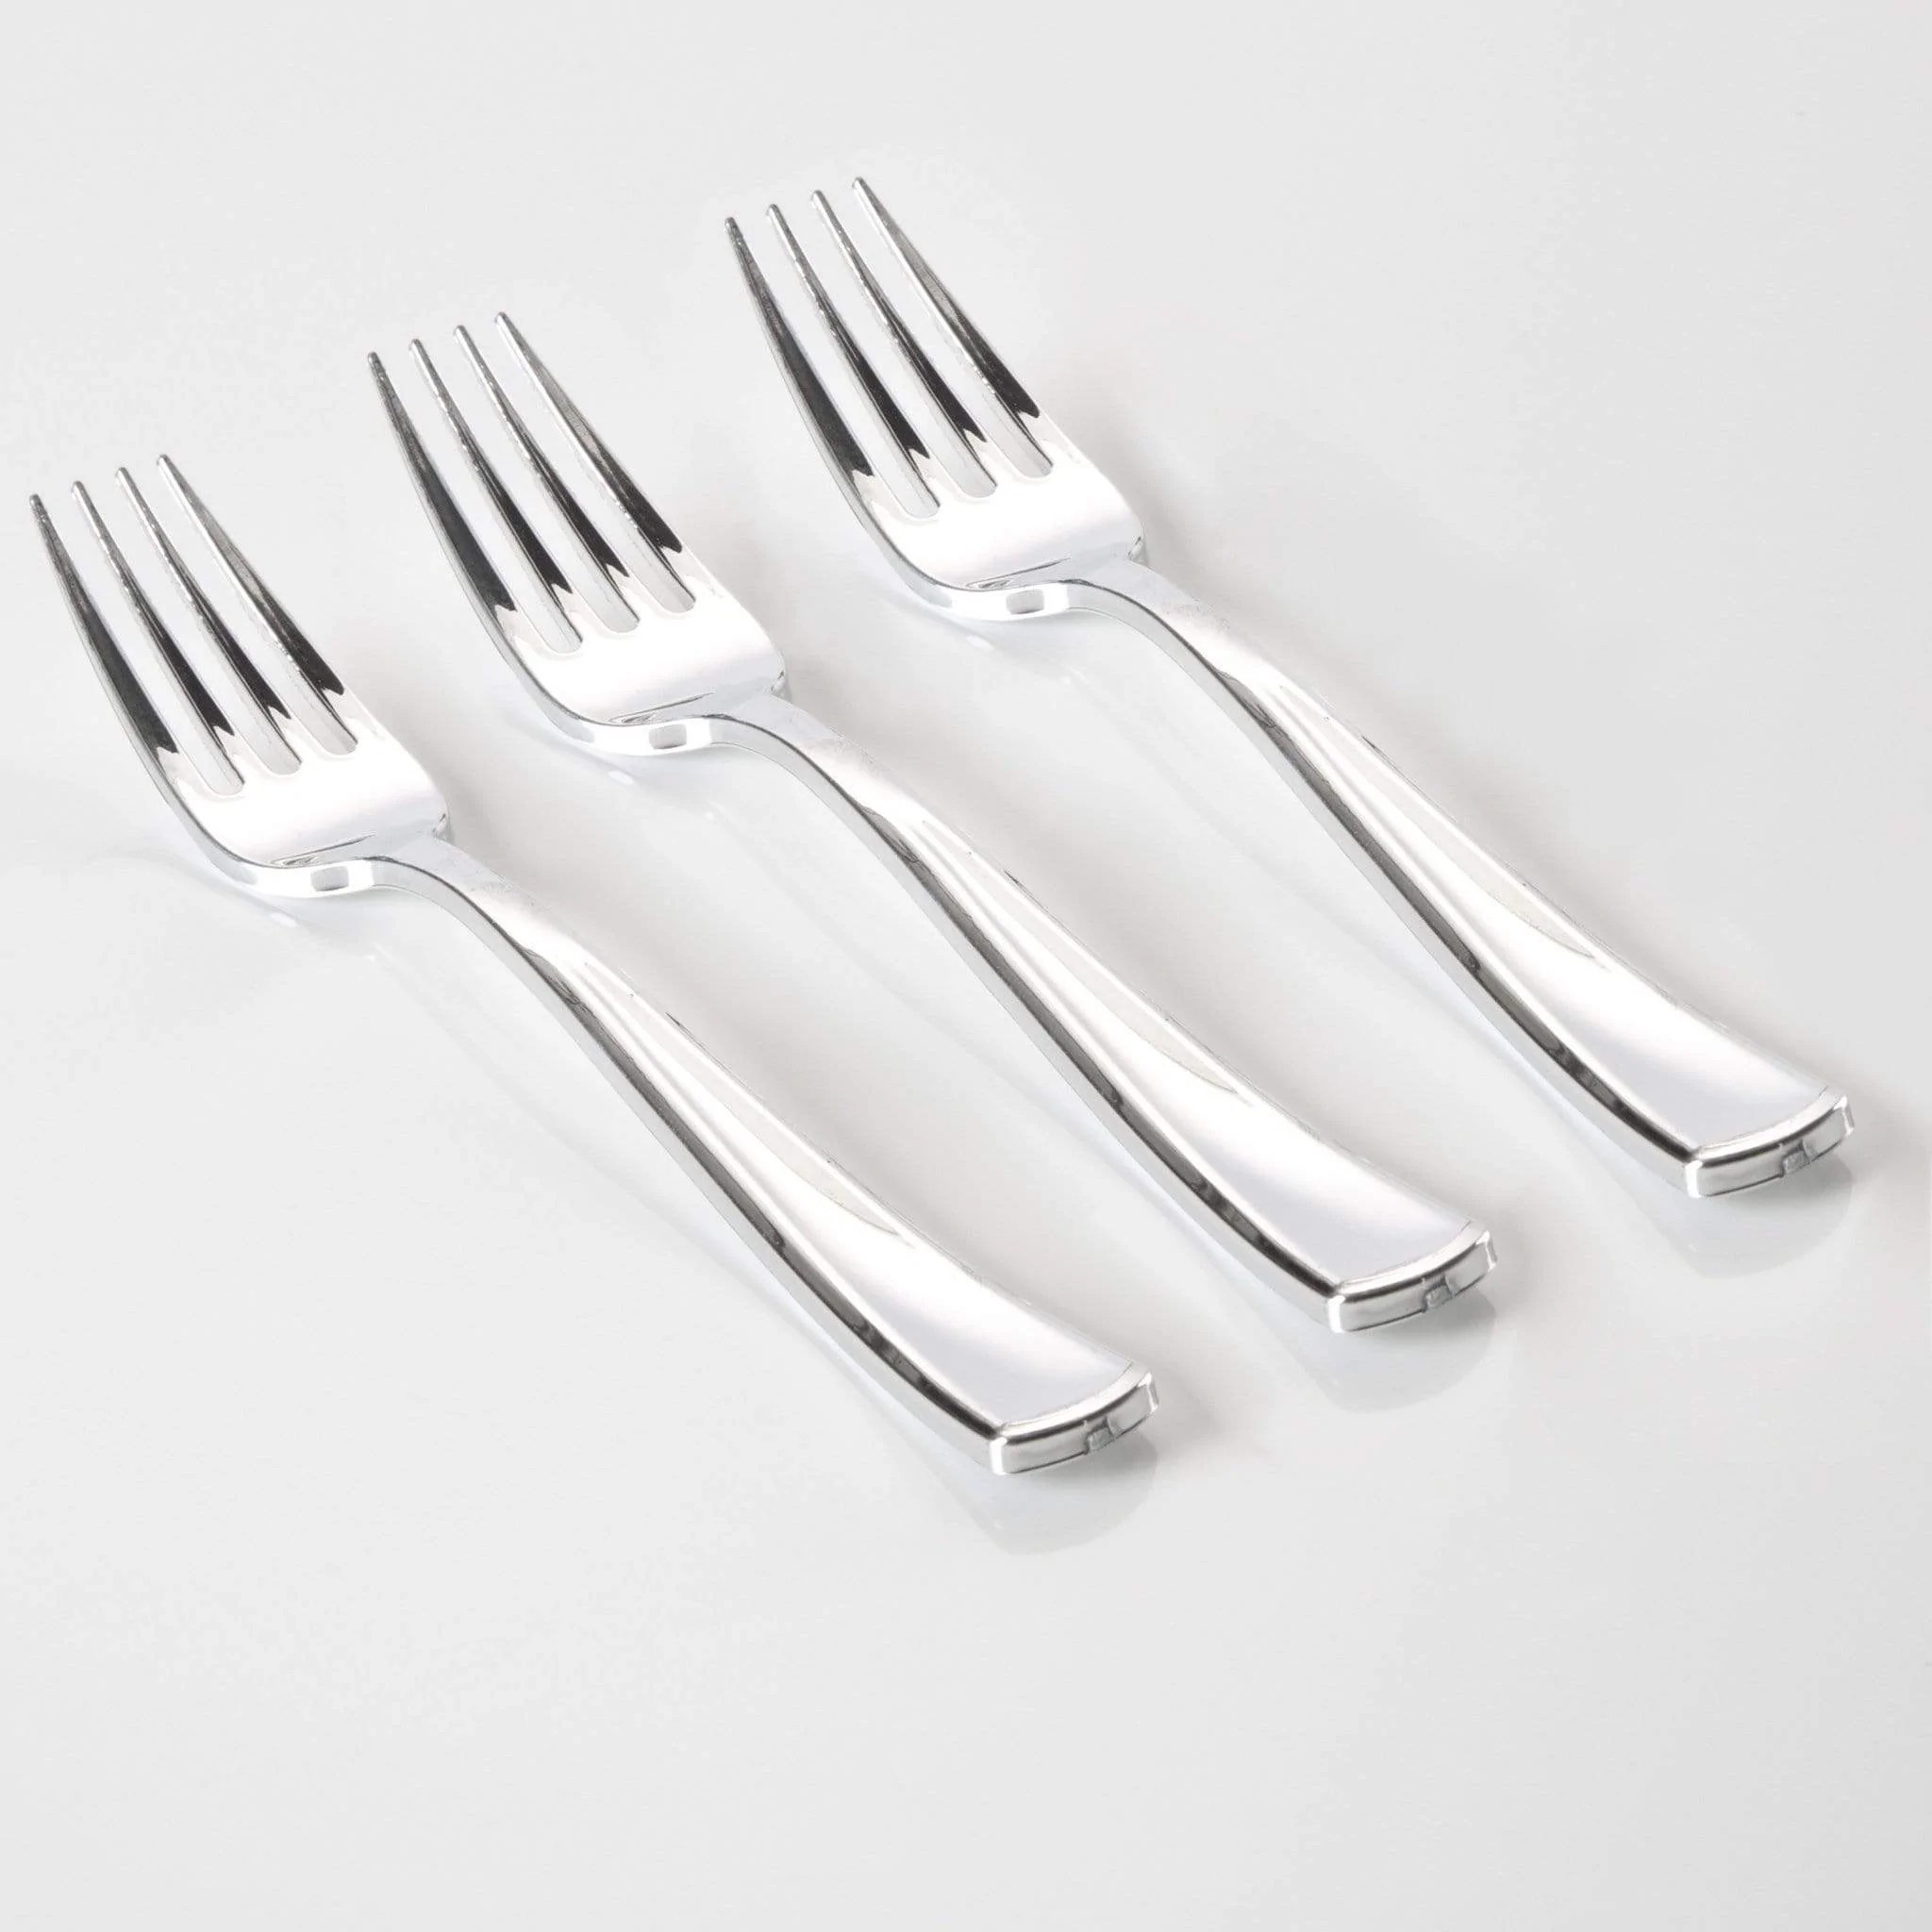 Luxe Party Classic Design Silver Plastic Forks - 20 pcs